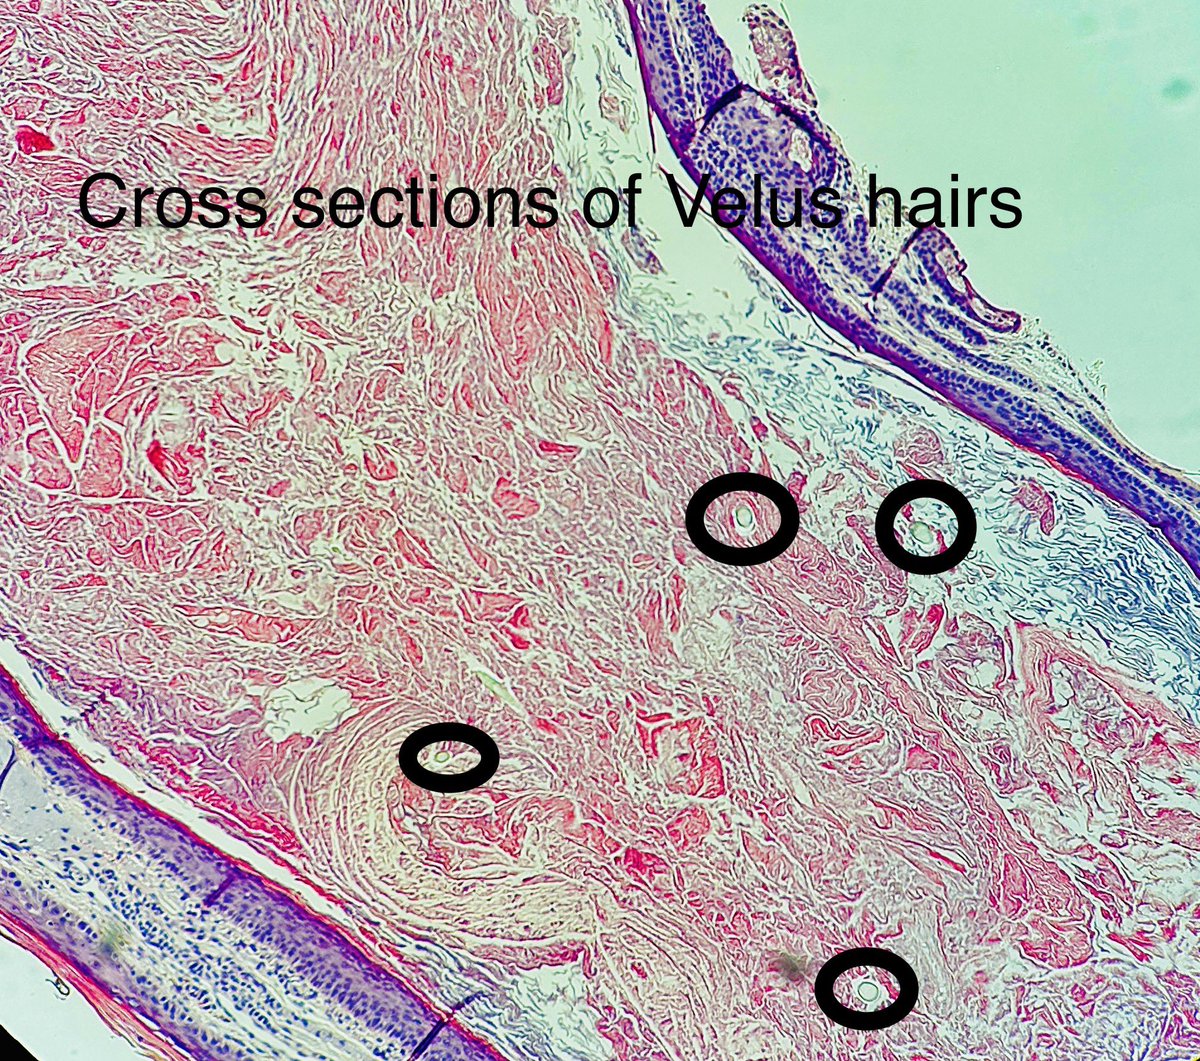 Velus hair cysts —> occlusion of the upper (infundibulum) portion of the velus hair follicle —> dilation +\- eruption. 

Oftentimes in chest. 

See velus hairs cut in cross section 👇 

#pathagonia 
#pathx #medstudentx #dermx #dermpath #cysts #familymed